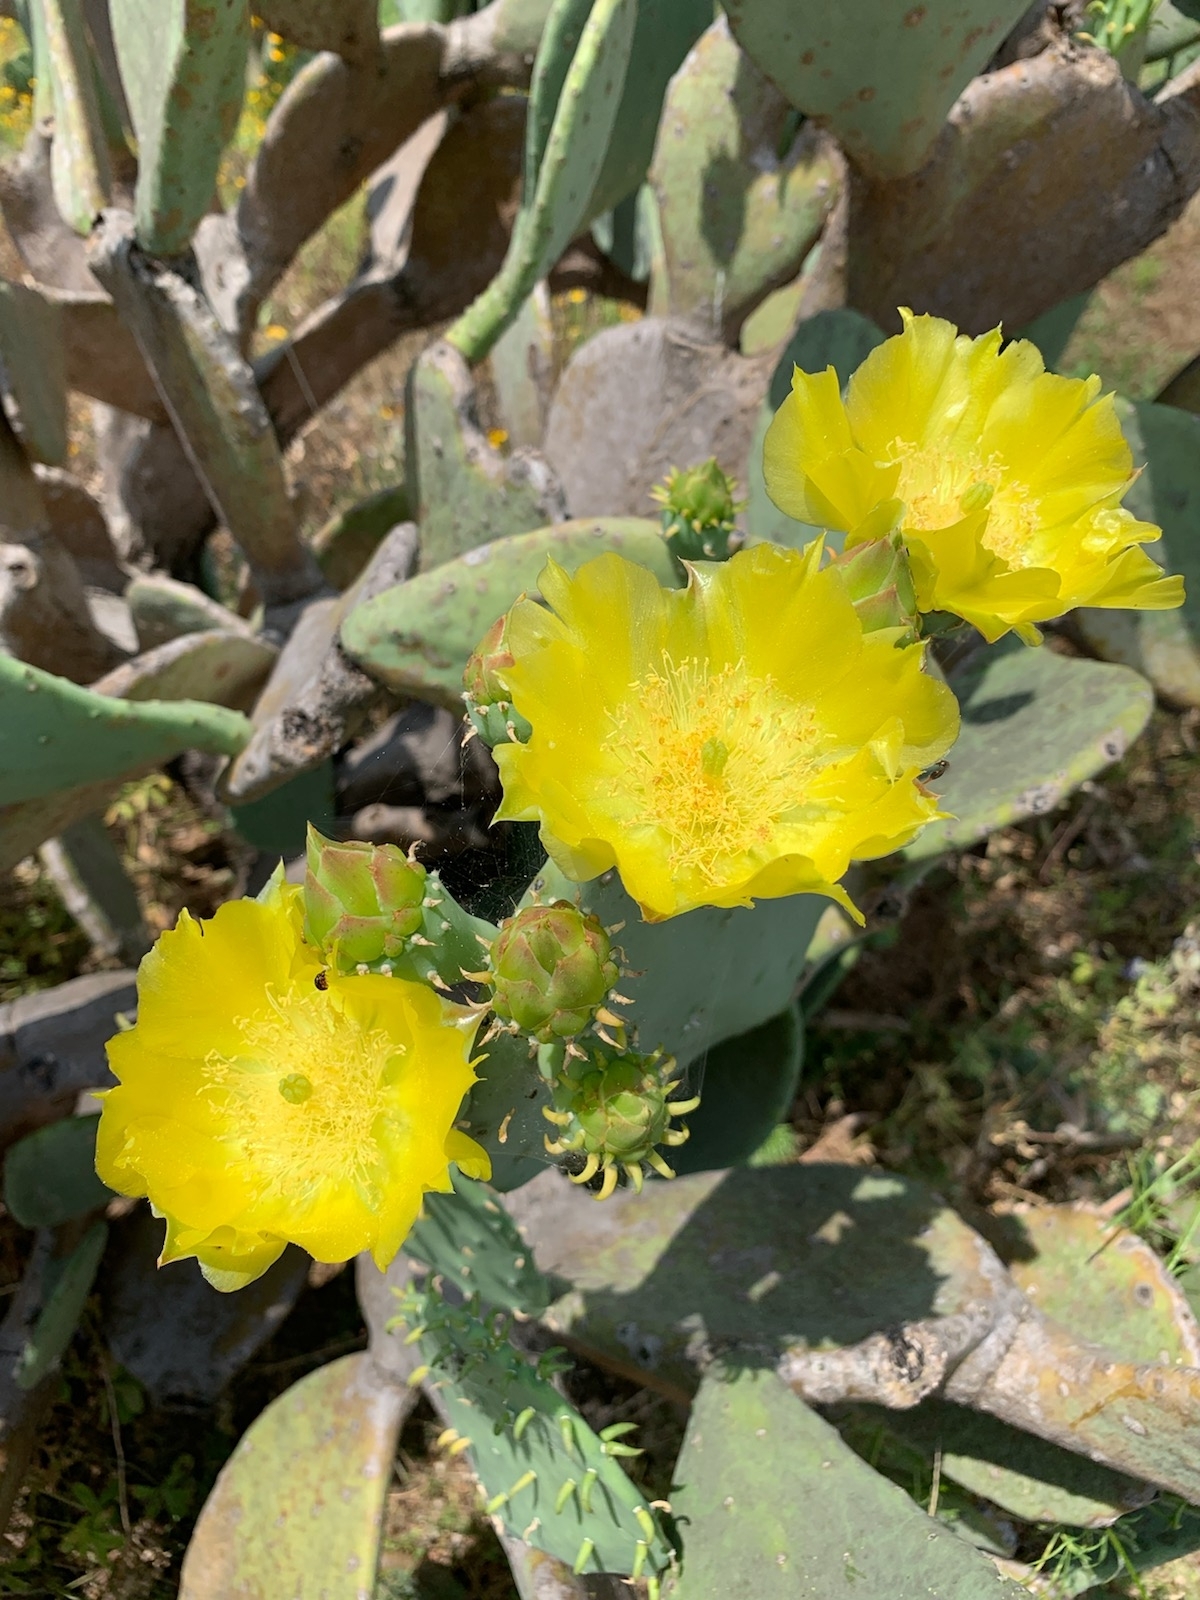 Yellow Prickly Pear Cactus Flowers picture for the website from Jeff Looney 10 13 2020